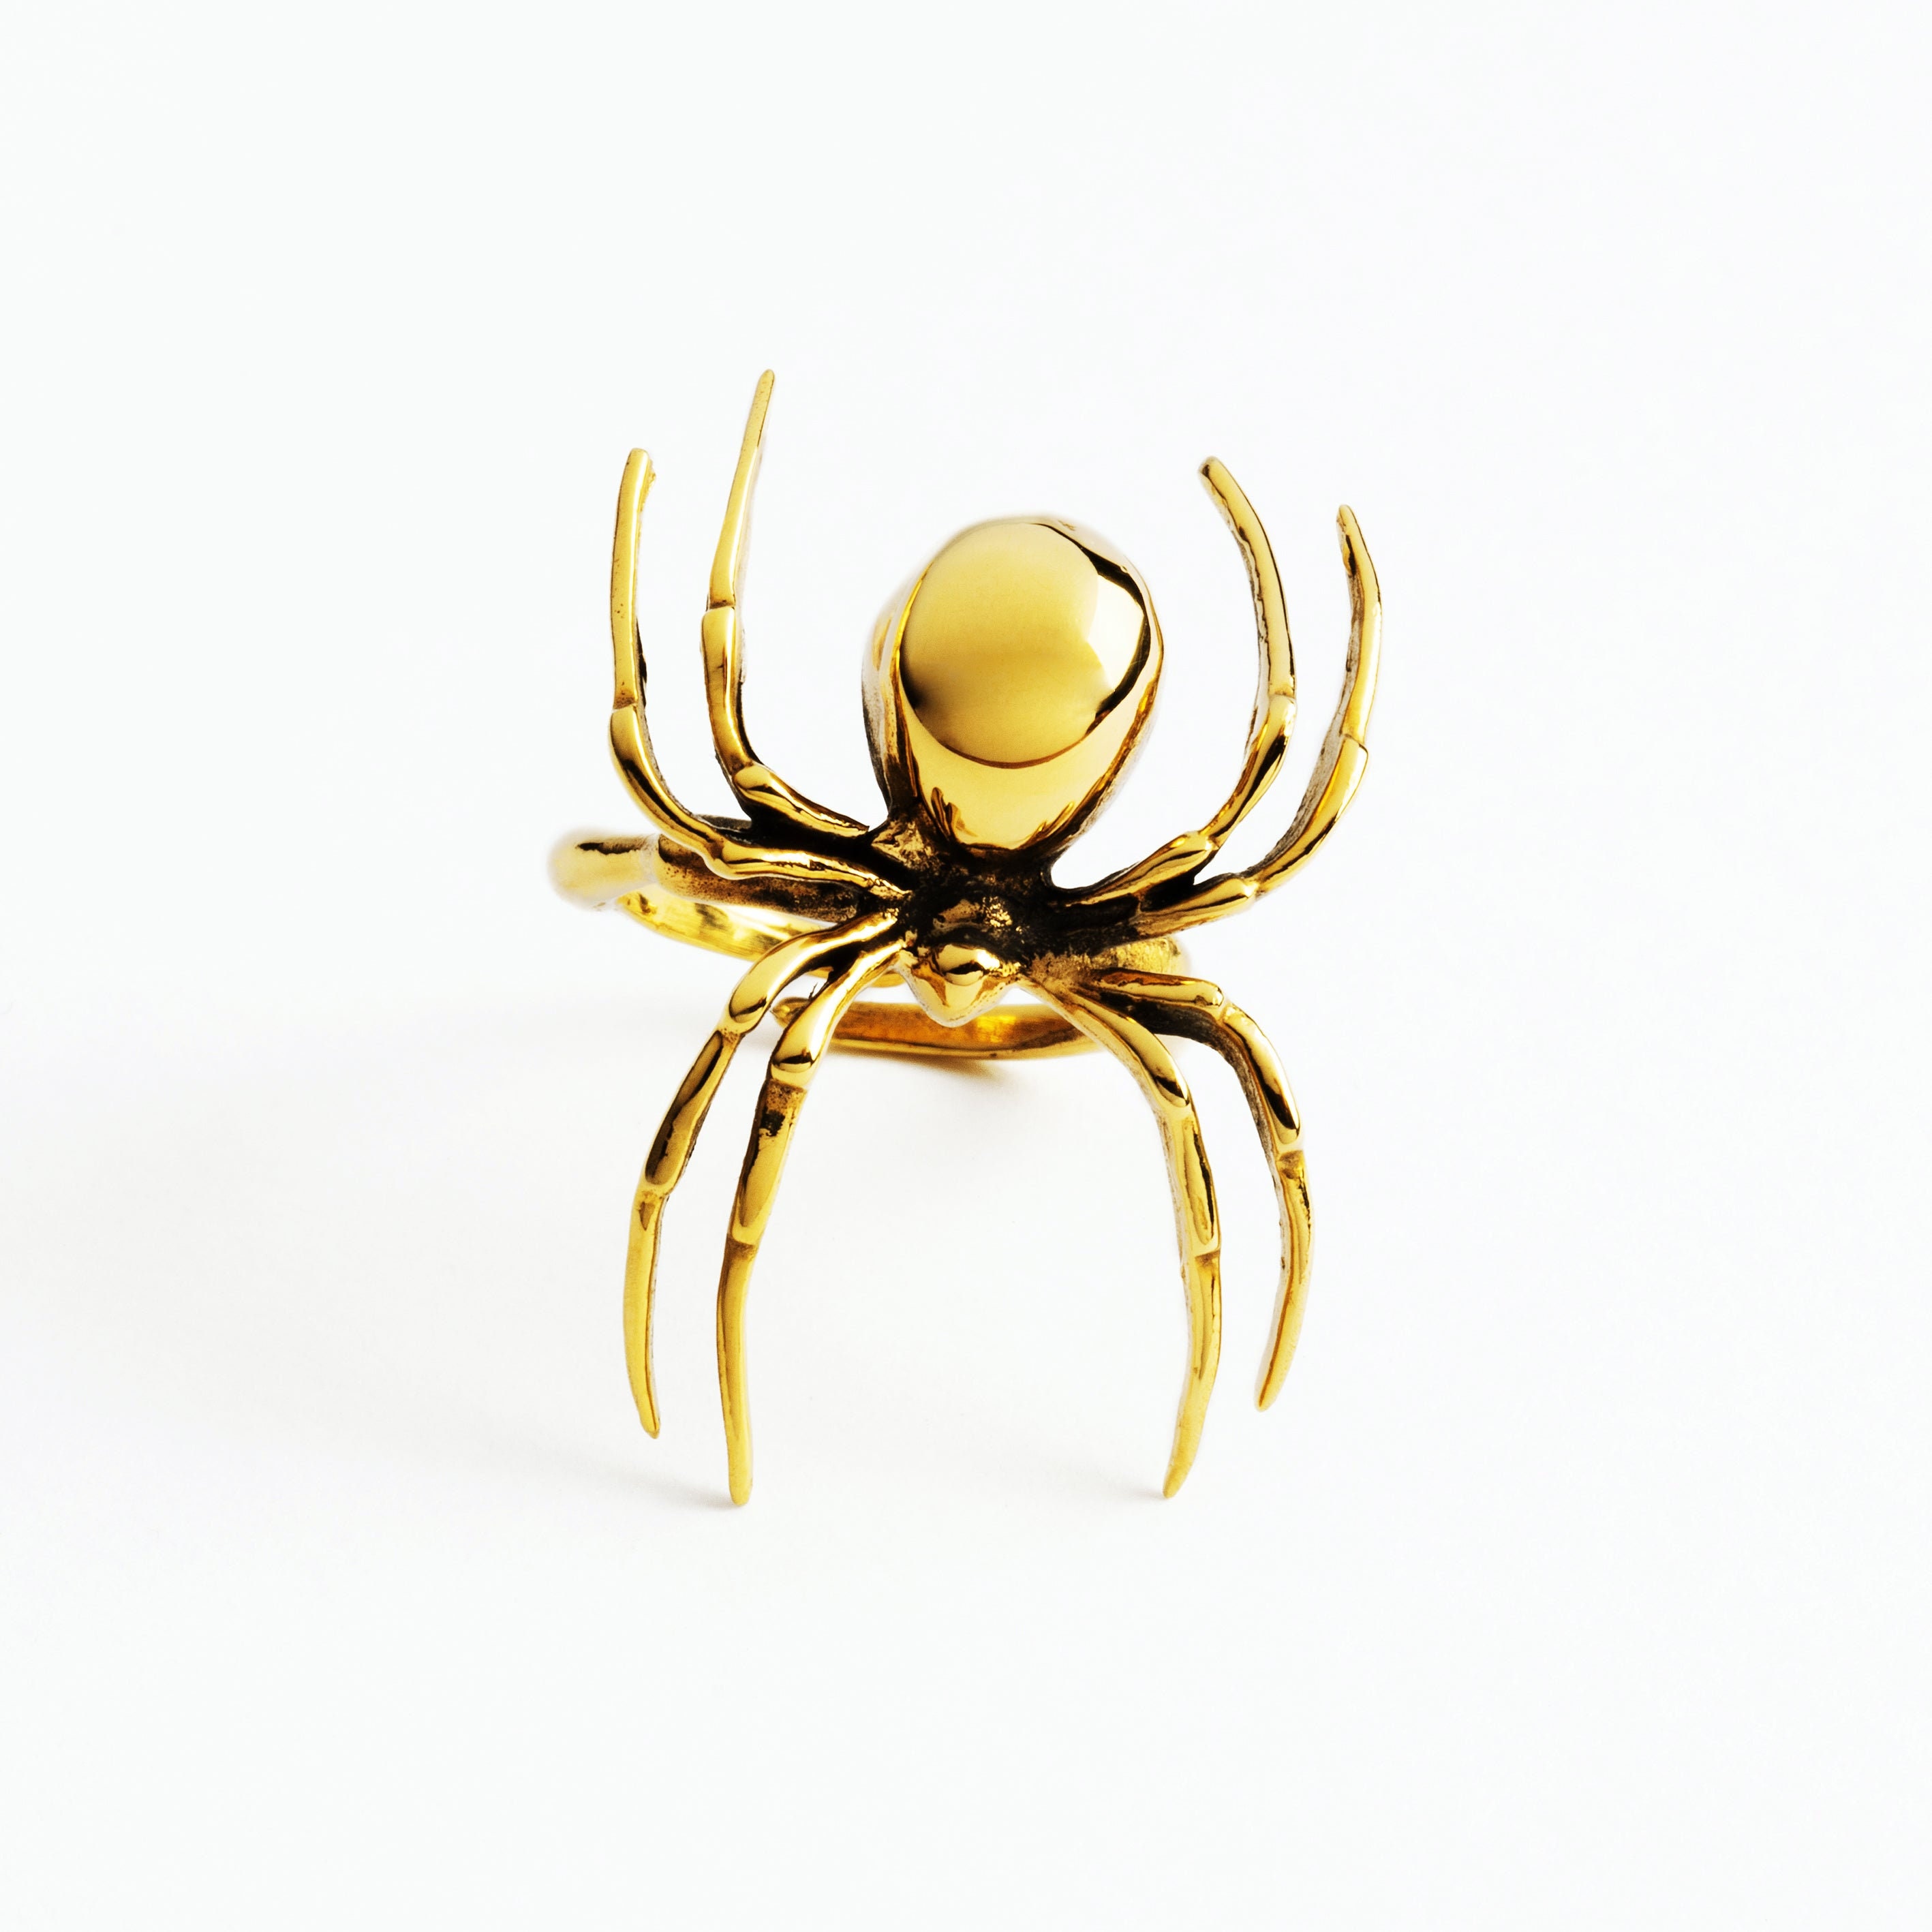 Sterling Silver 925 Spider Ring Black Widow Halloween Jewelry Insect Ring  R58